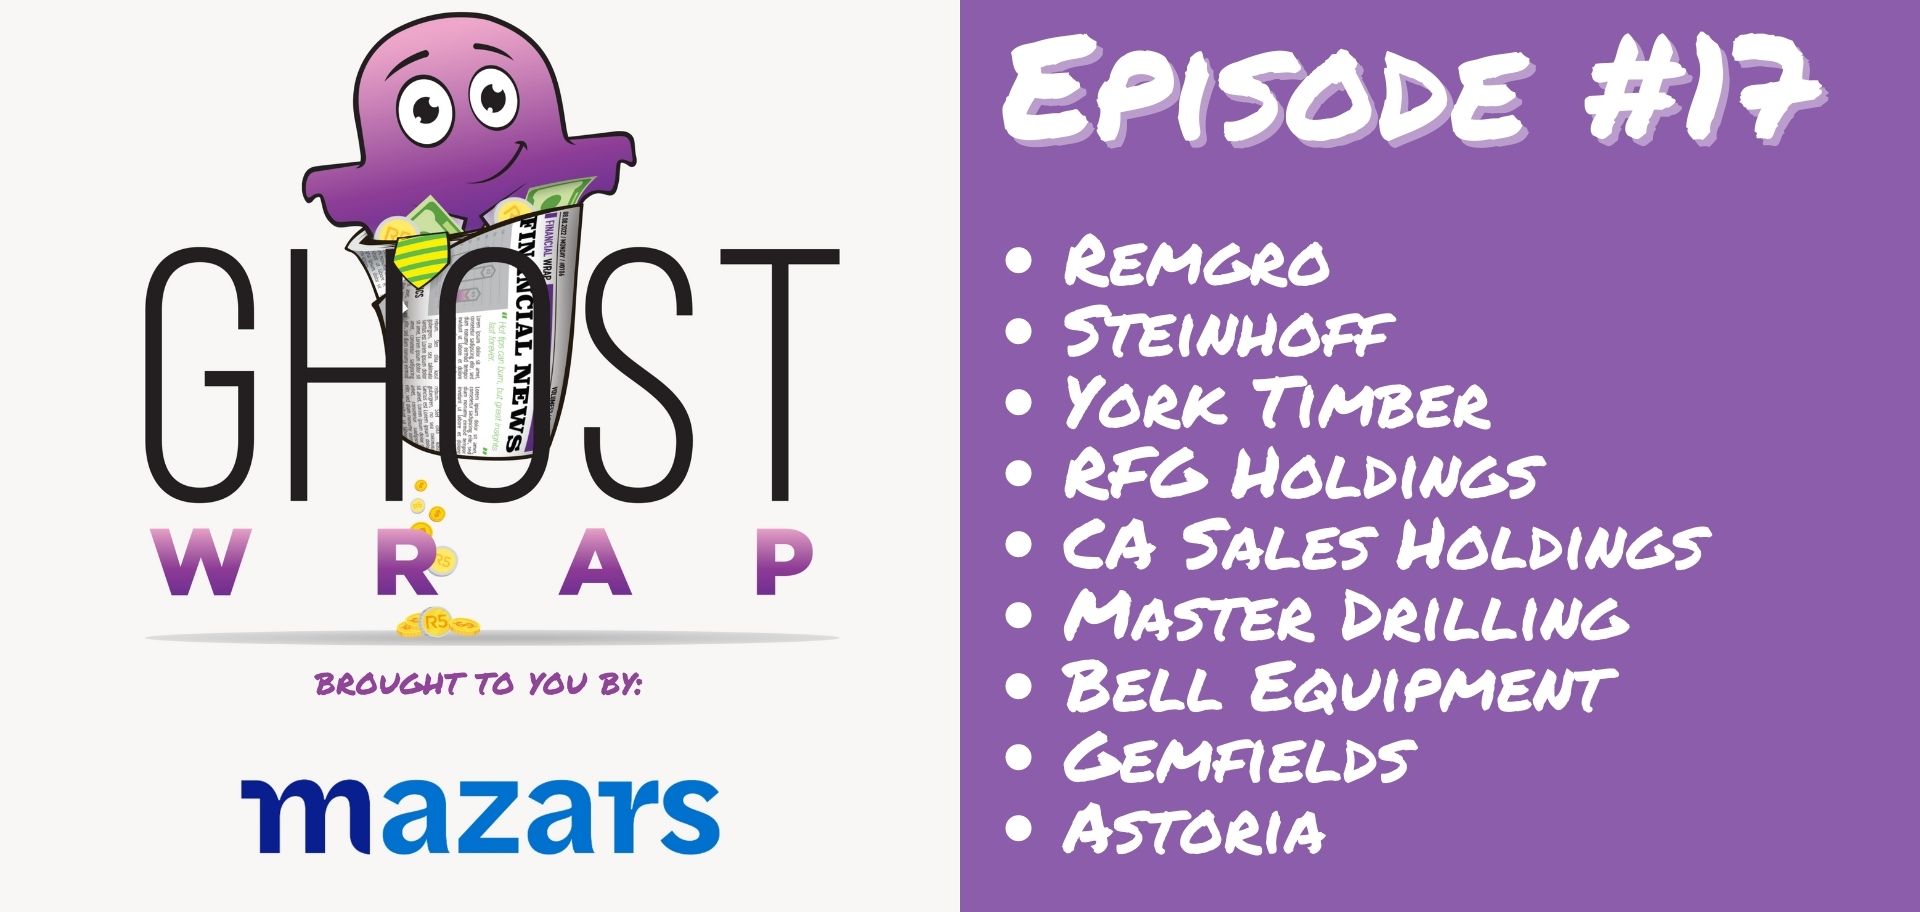 Ghost Wrap #17 (Remgro | Steinhoff | York Timber | RFG Holdings | CA Sales Holdings | Master Drilling | Bell Equipment | Gemfields | Astoria)